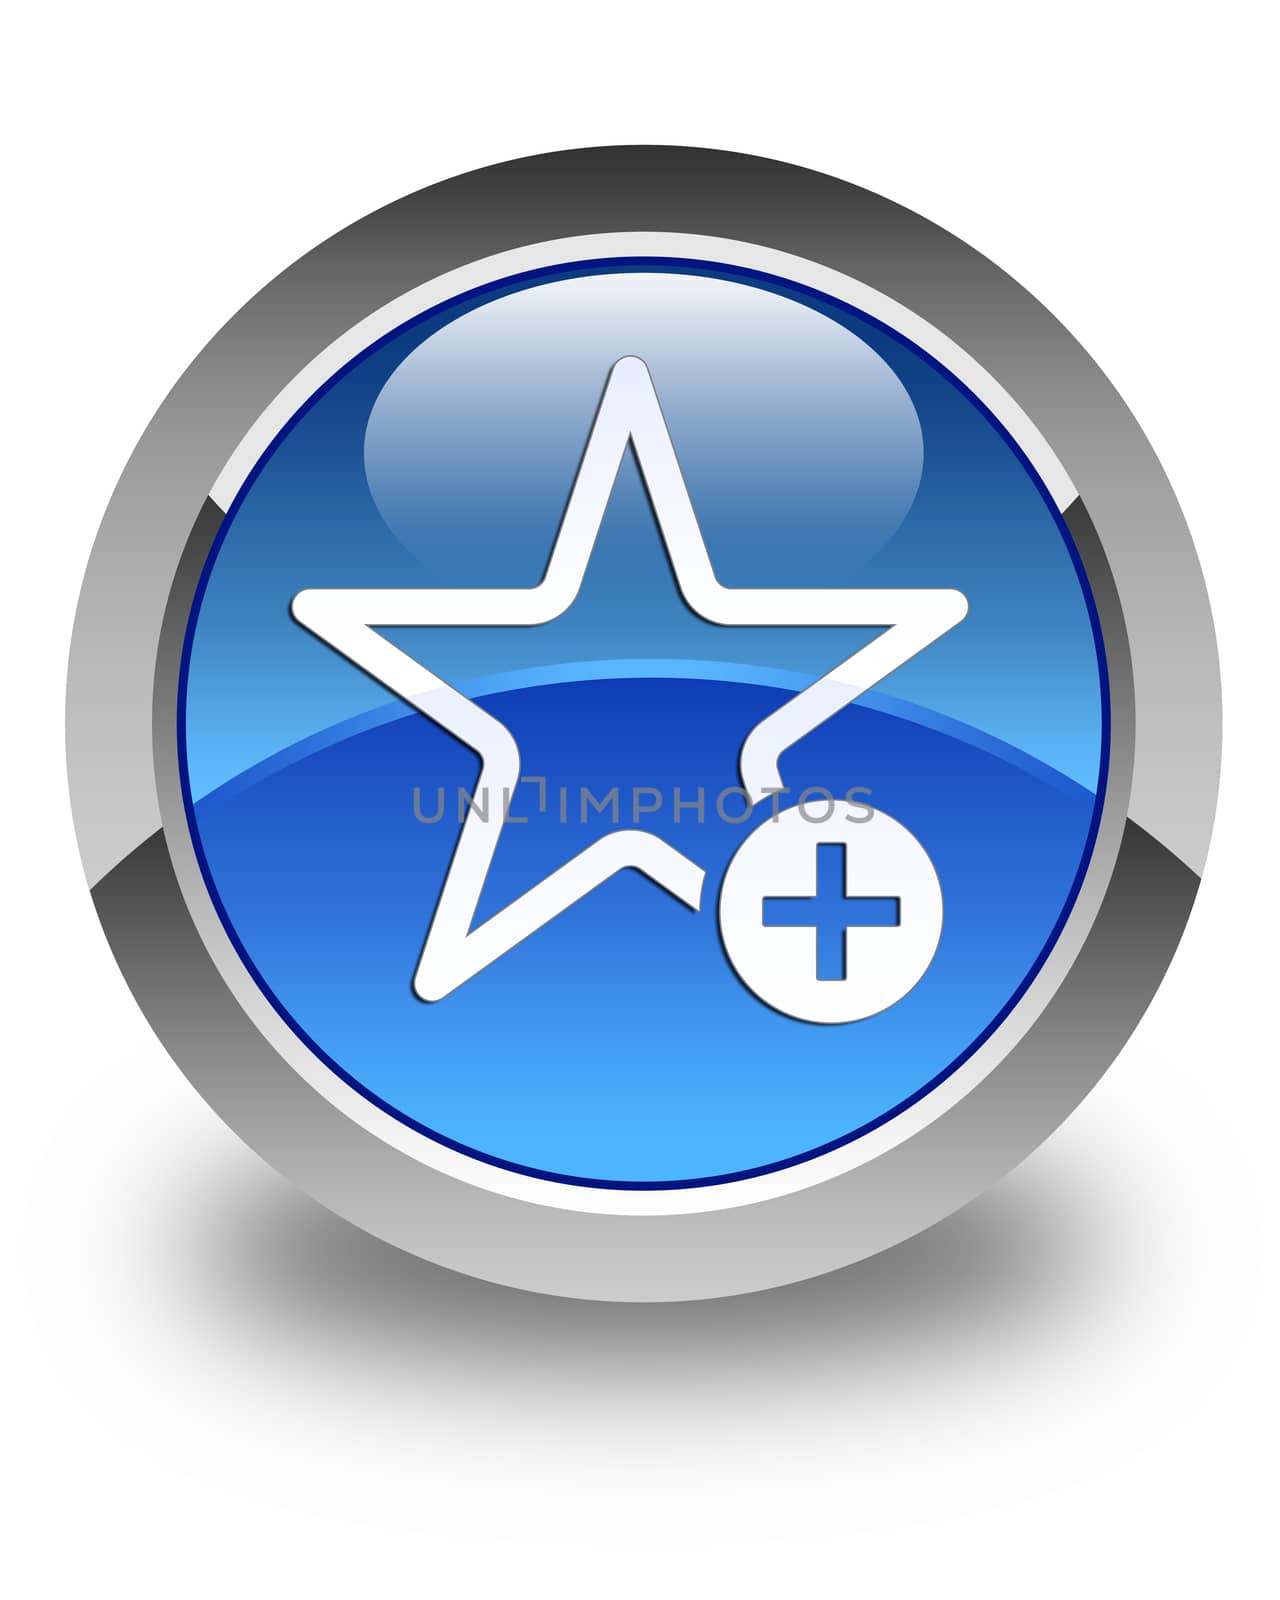 Add to favorite icon glossy blue round button